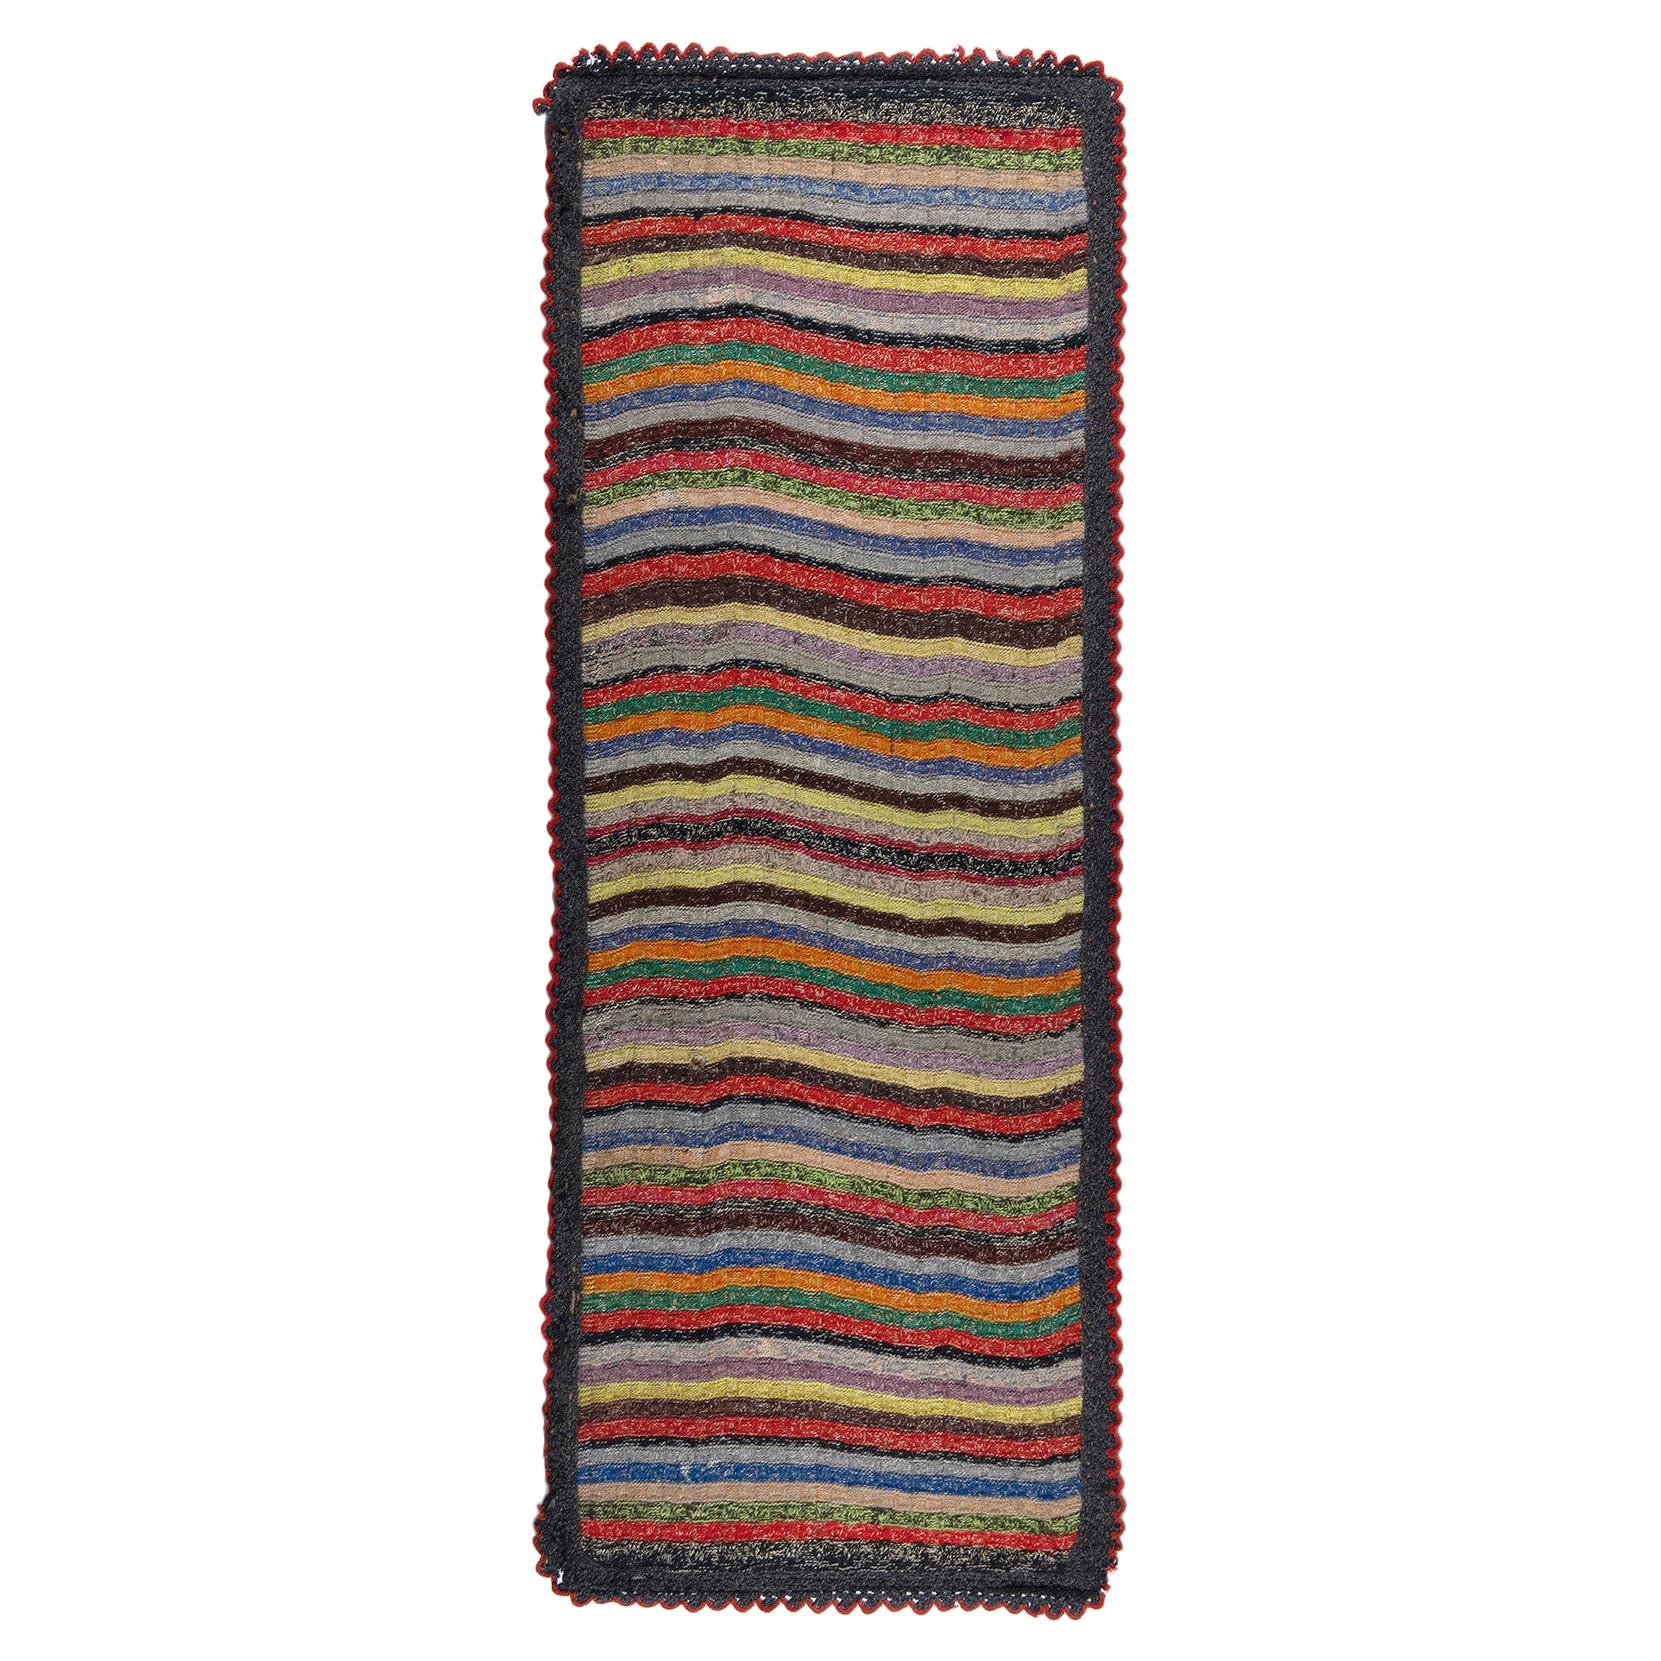 Graphic Hand Woven Shaker Textile